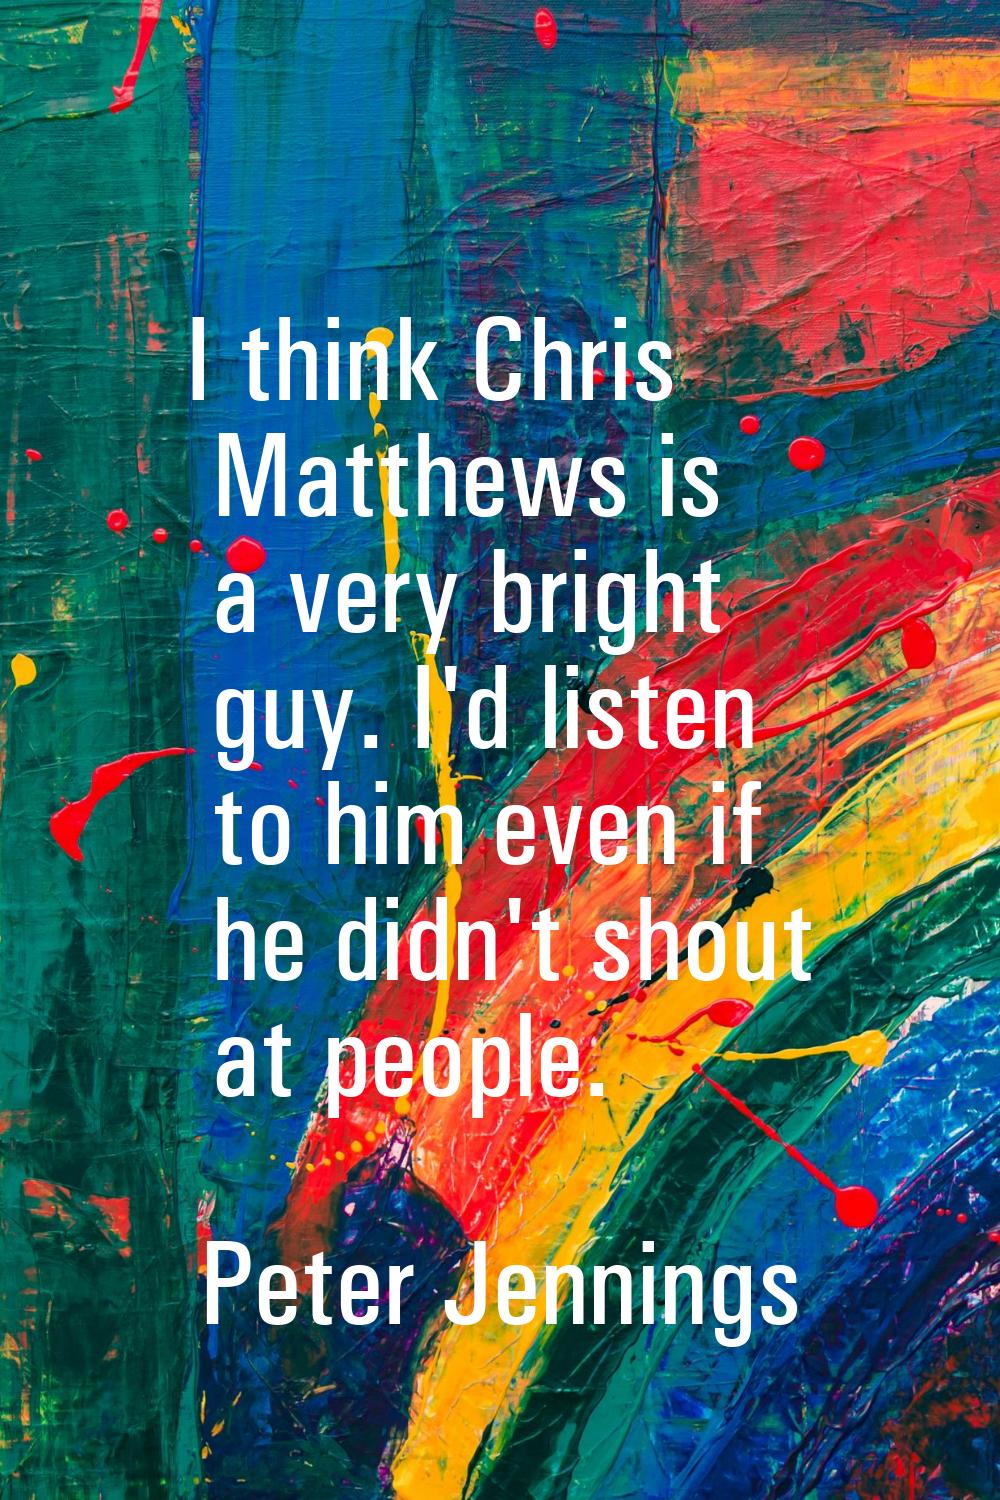 I think Chris Matthews is a very bright guy. I'd listen to him even if he didn't shout at people.